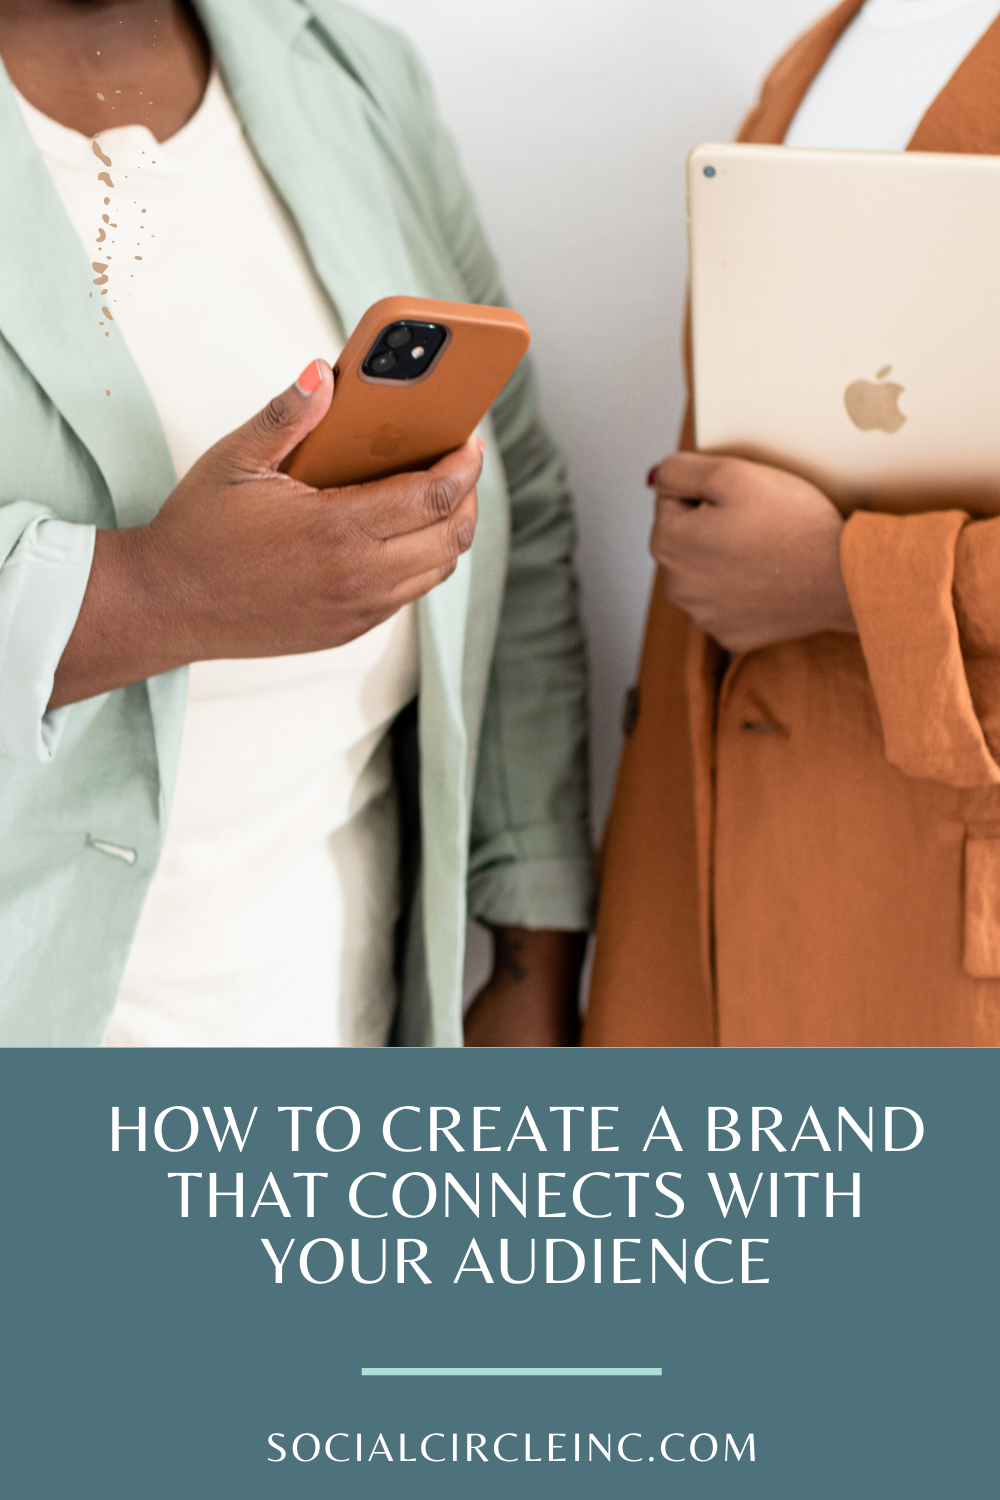 How to Create a Brand that Connects with Your Audience 5